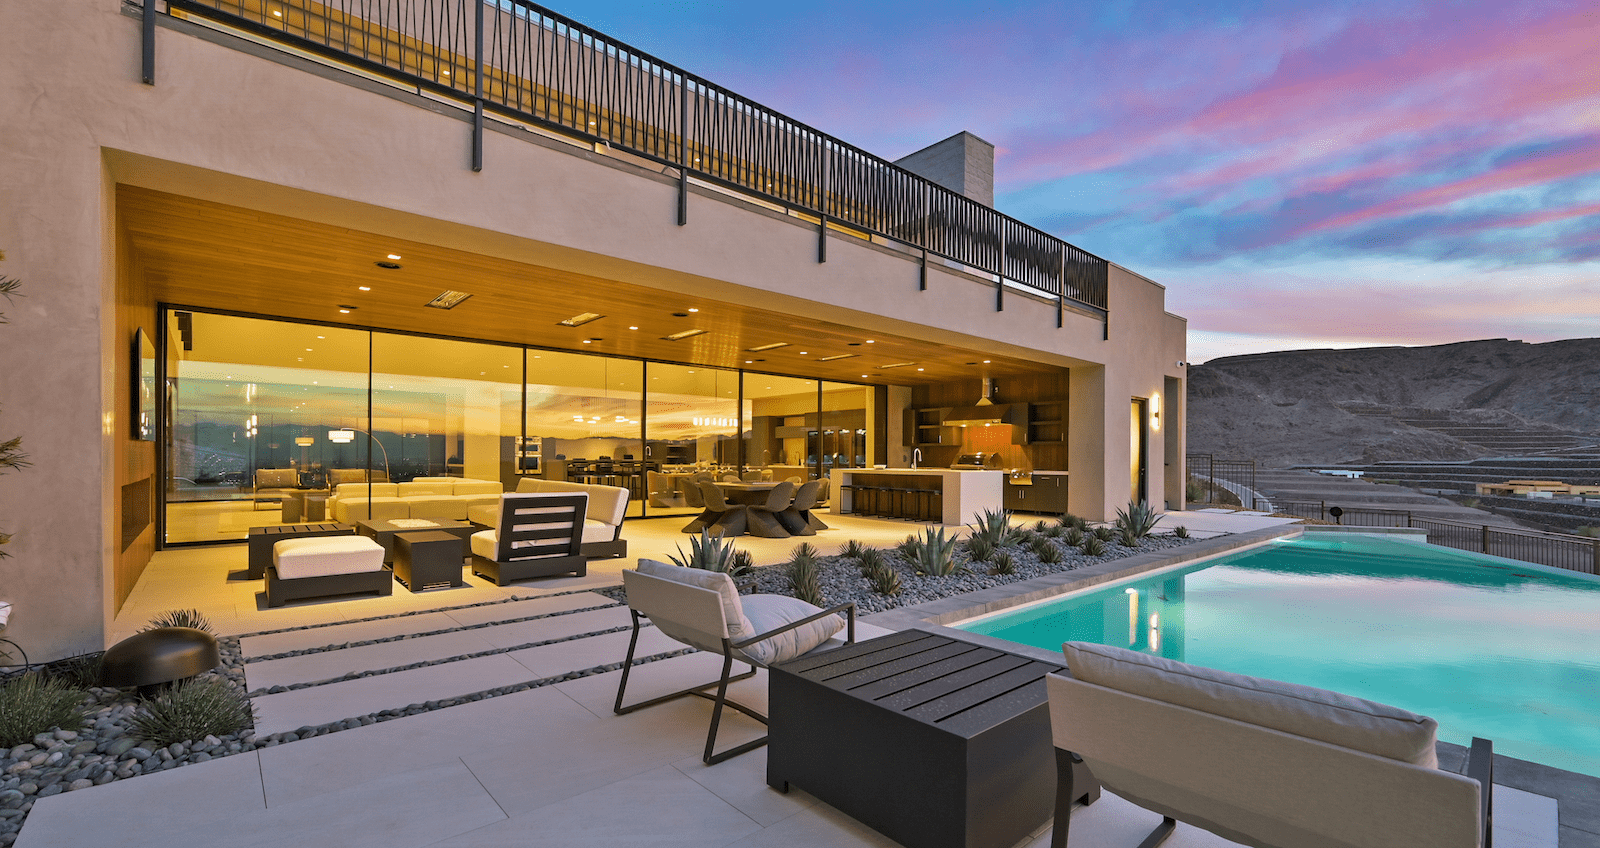 Outdoor living space by the pool at The New American Home 2023